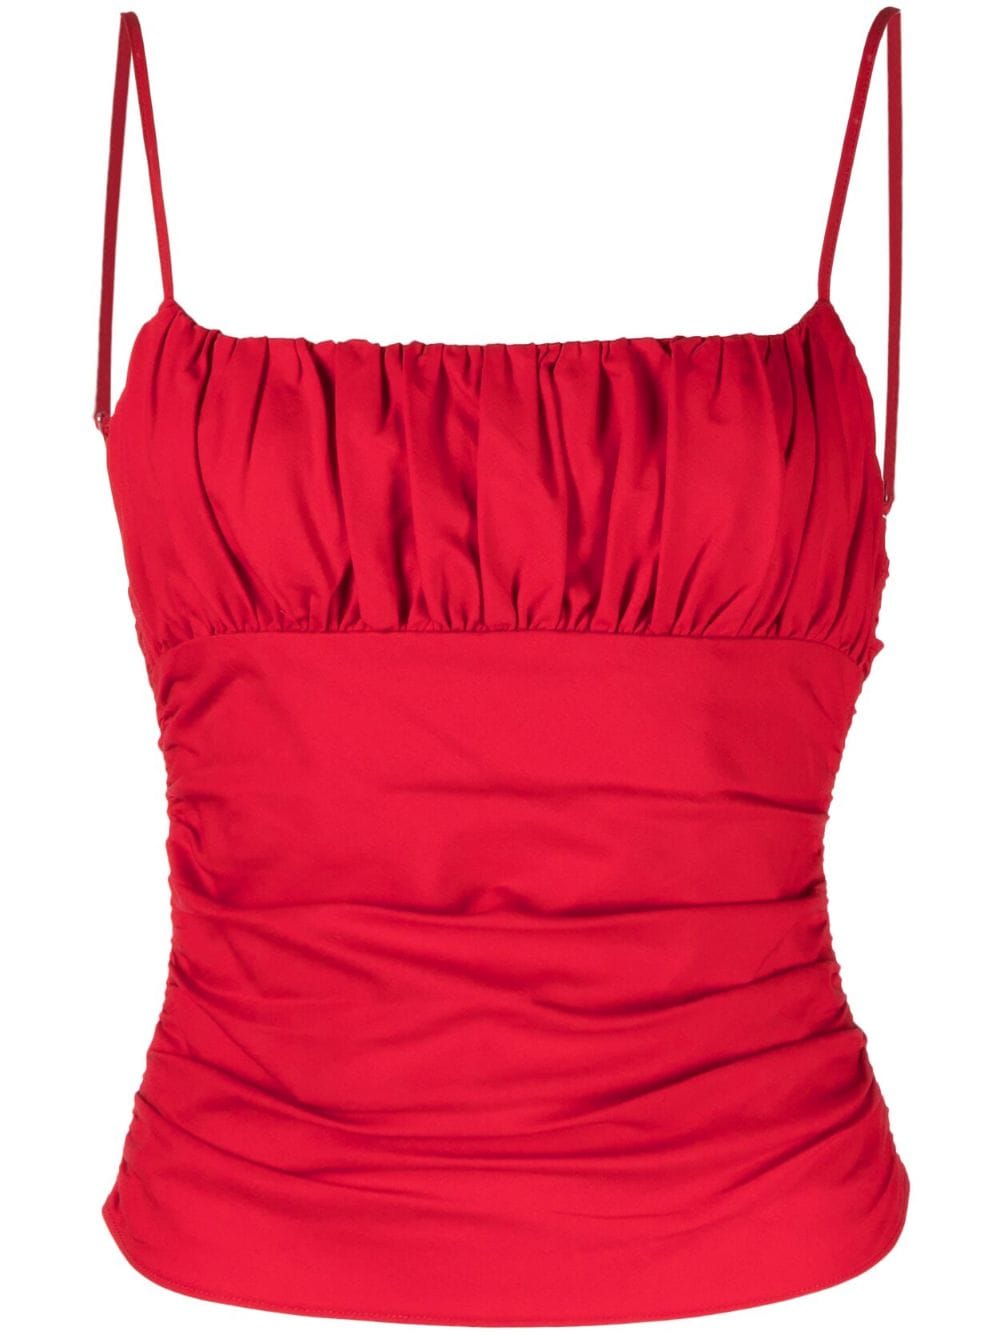 Reformation Tiana ruched top - Red